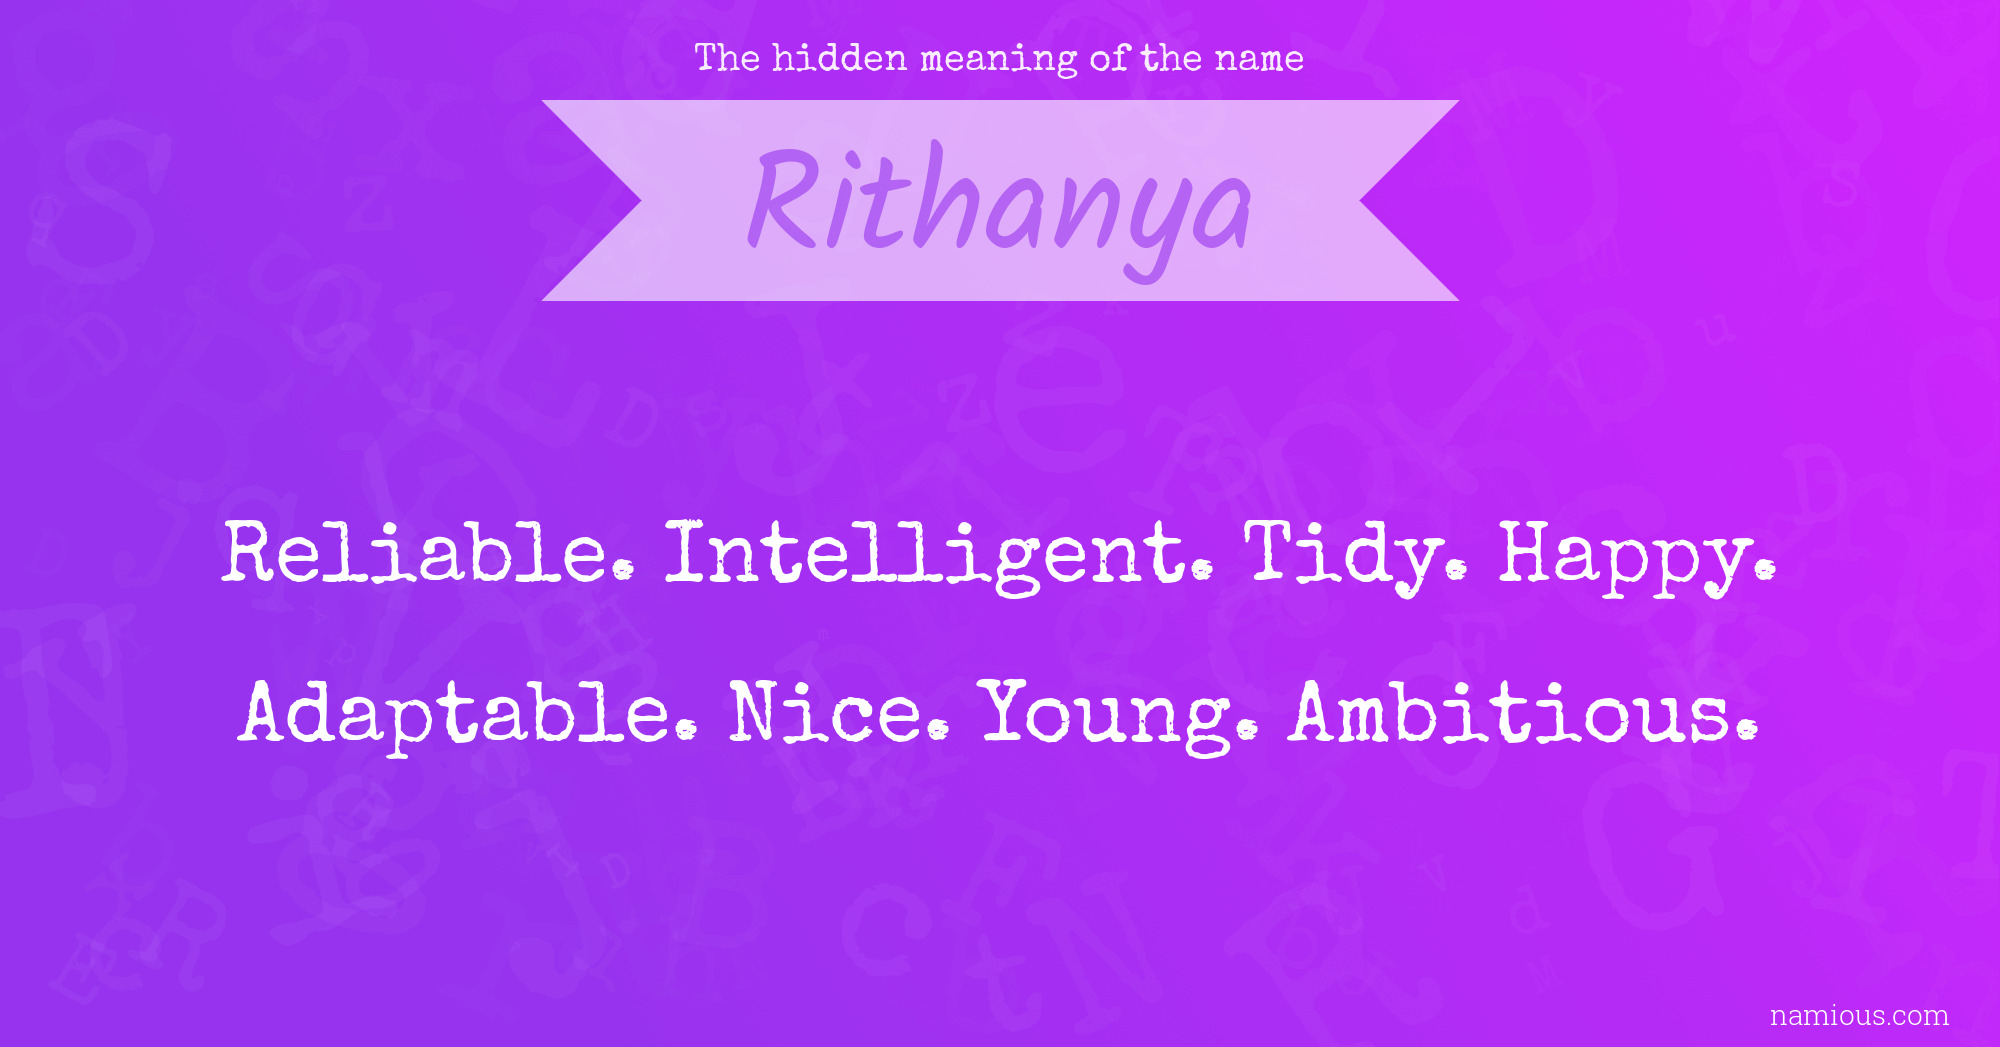 The hidden meaning of the name Rithanya